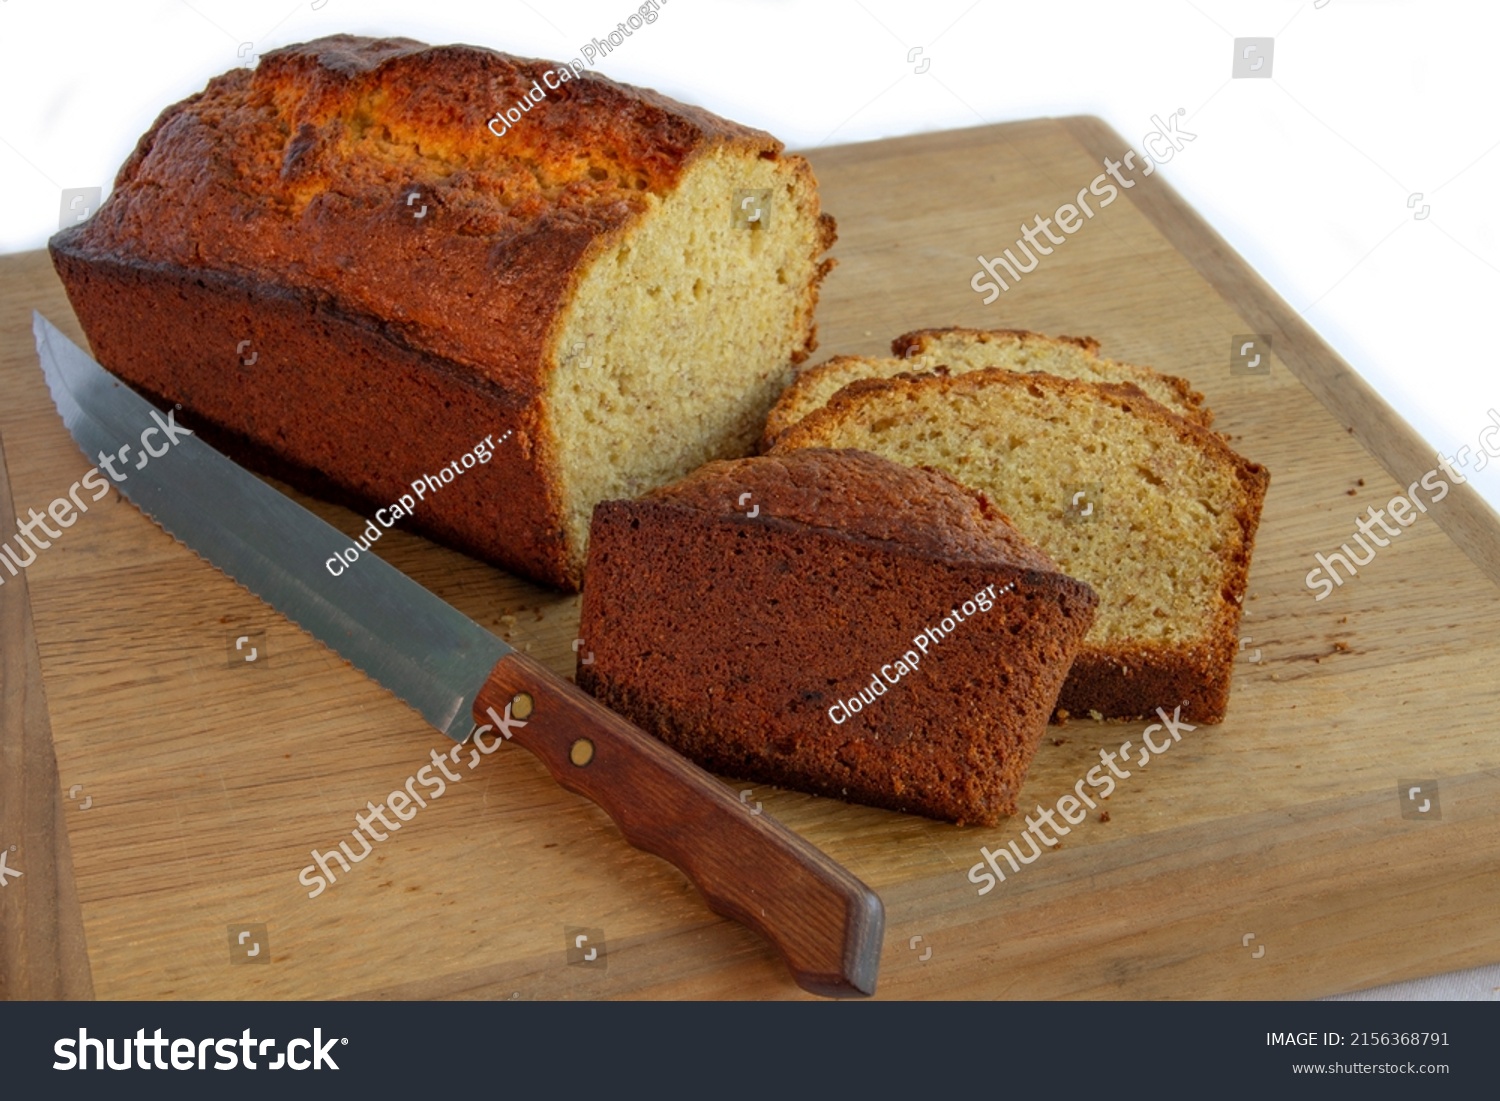 Loaf of Homemade Whole Wheat Banana Bread Loaf on Wood Breadboard with Knife #2156368791